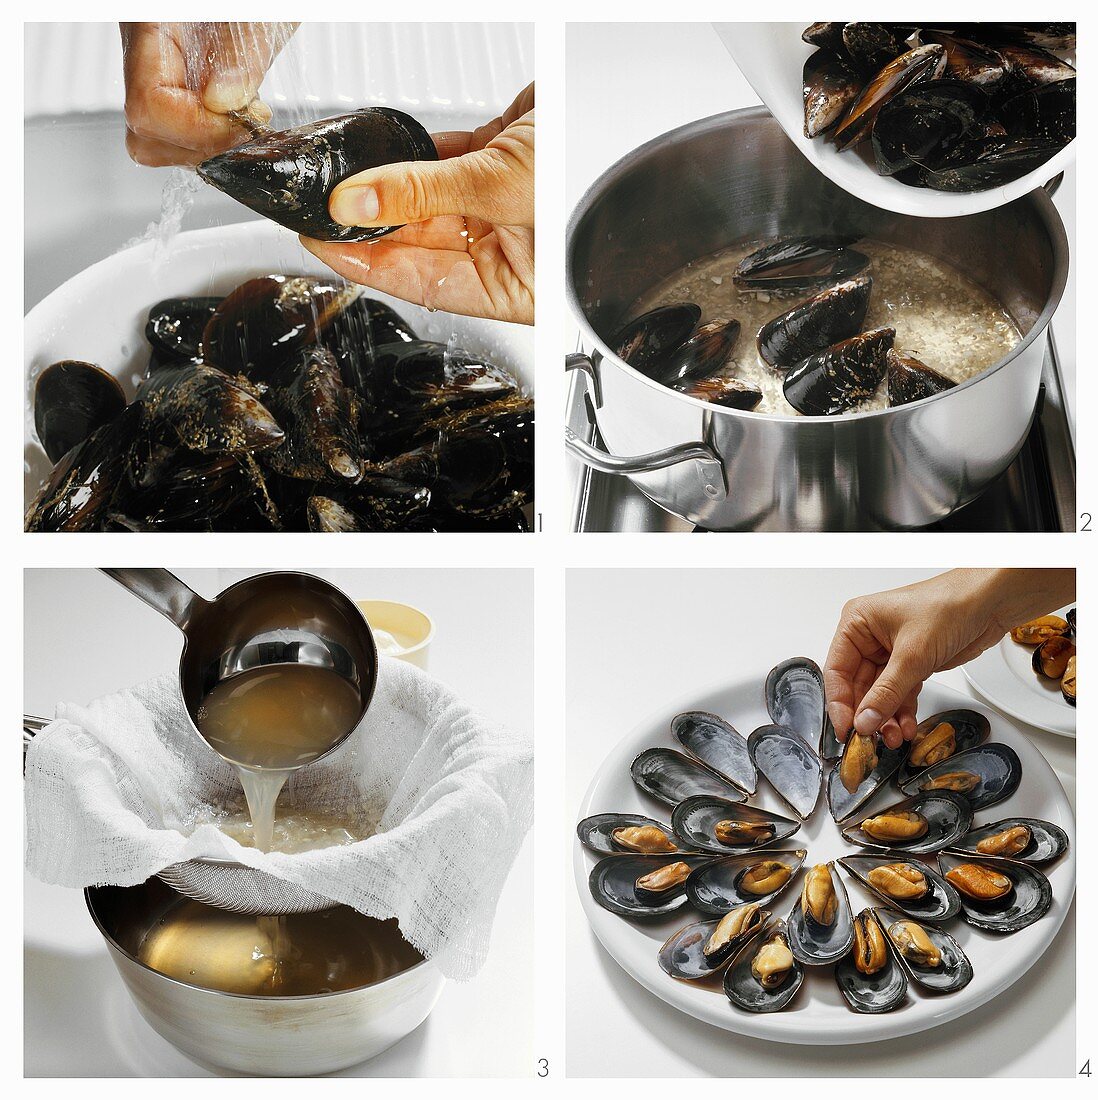 Preparing and cooking mussels & arranging them on a plate